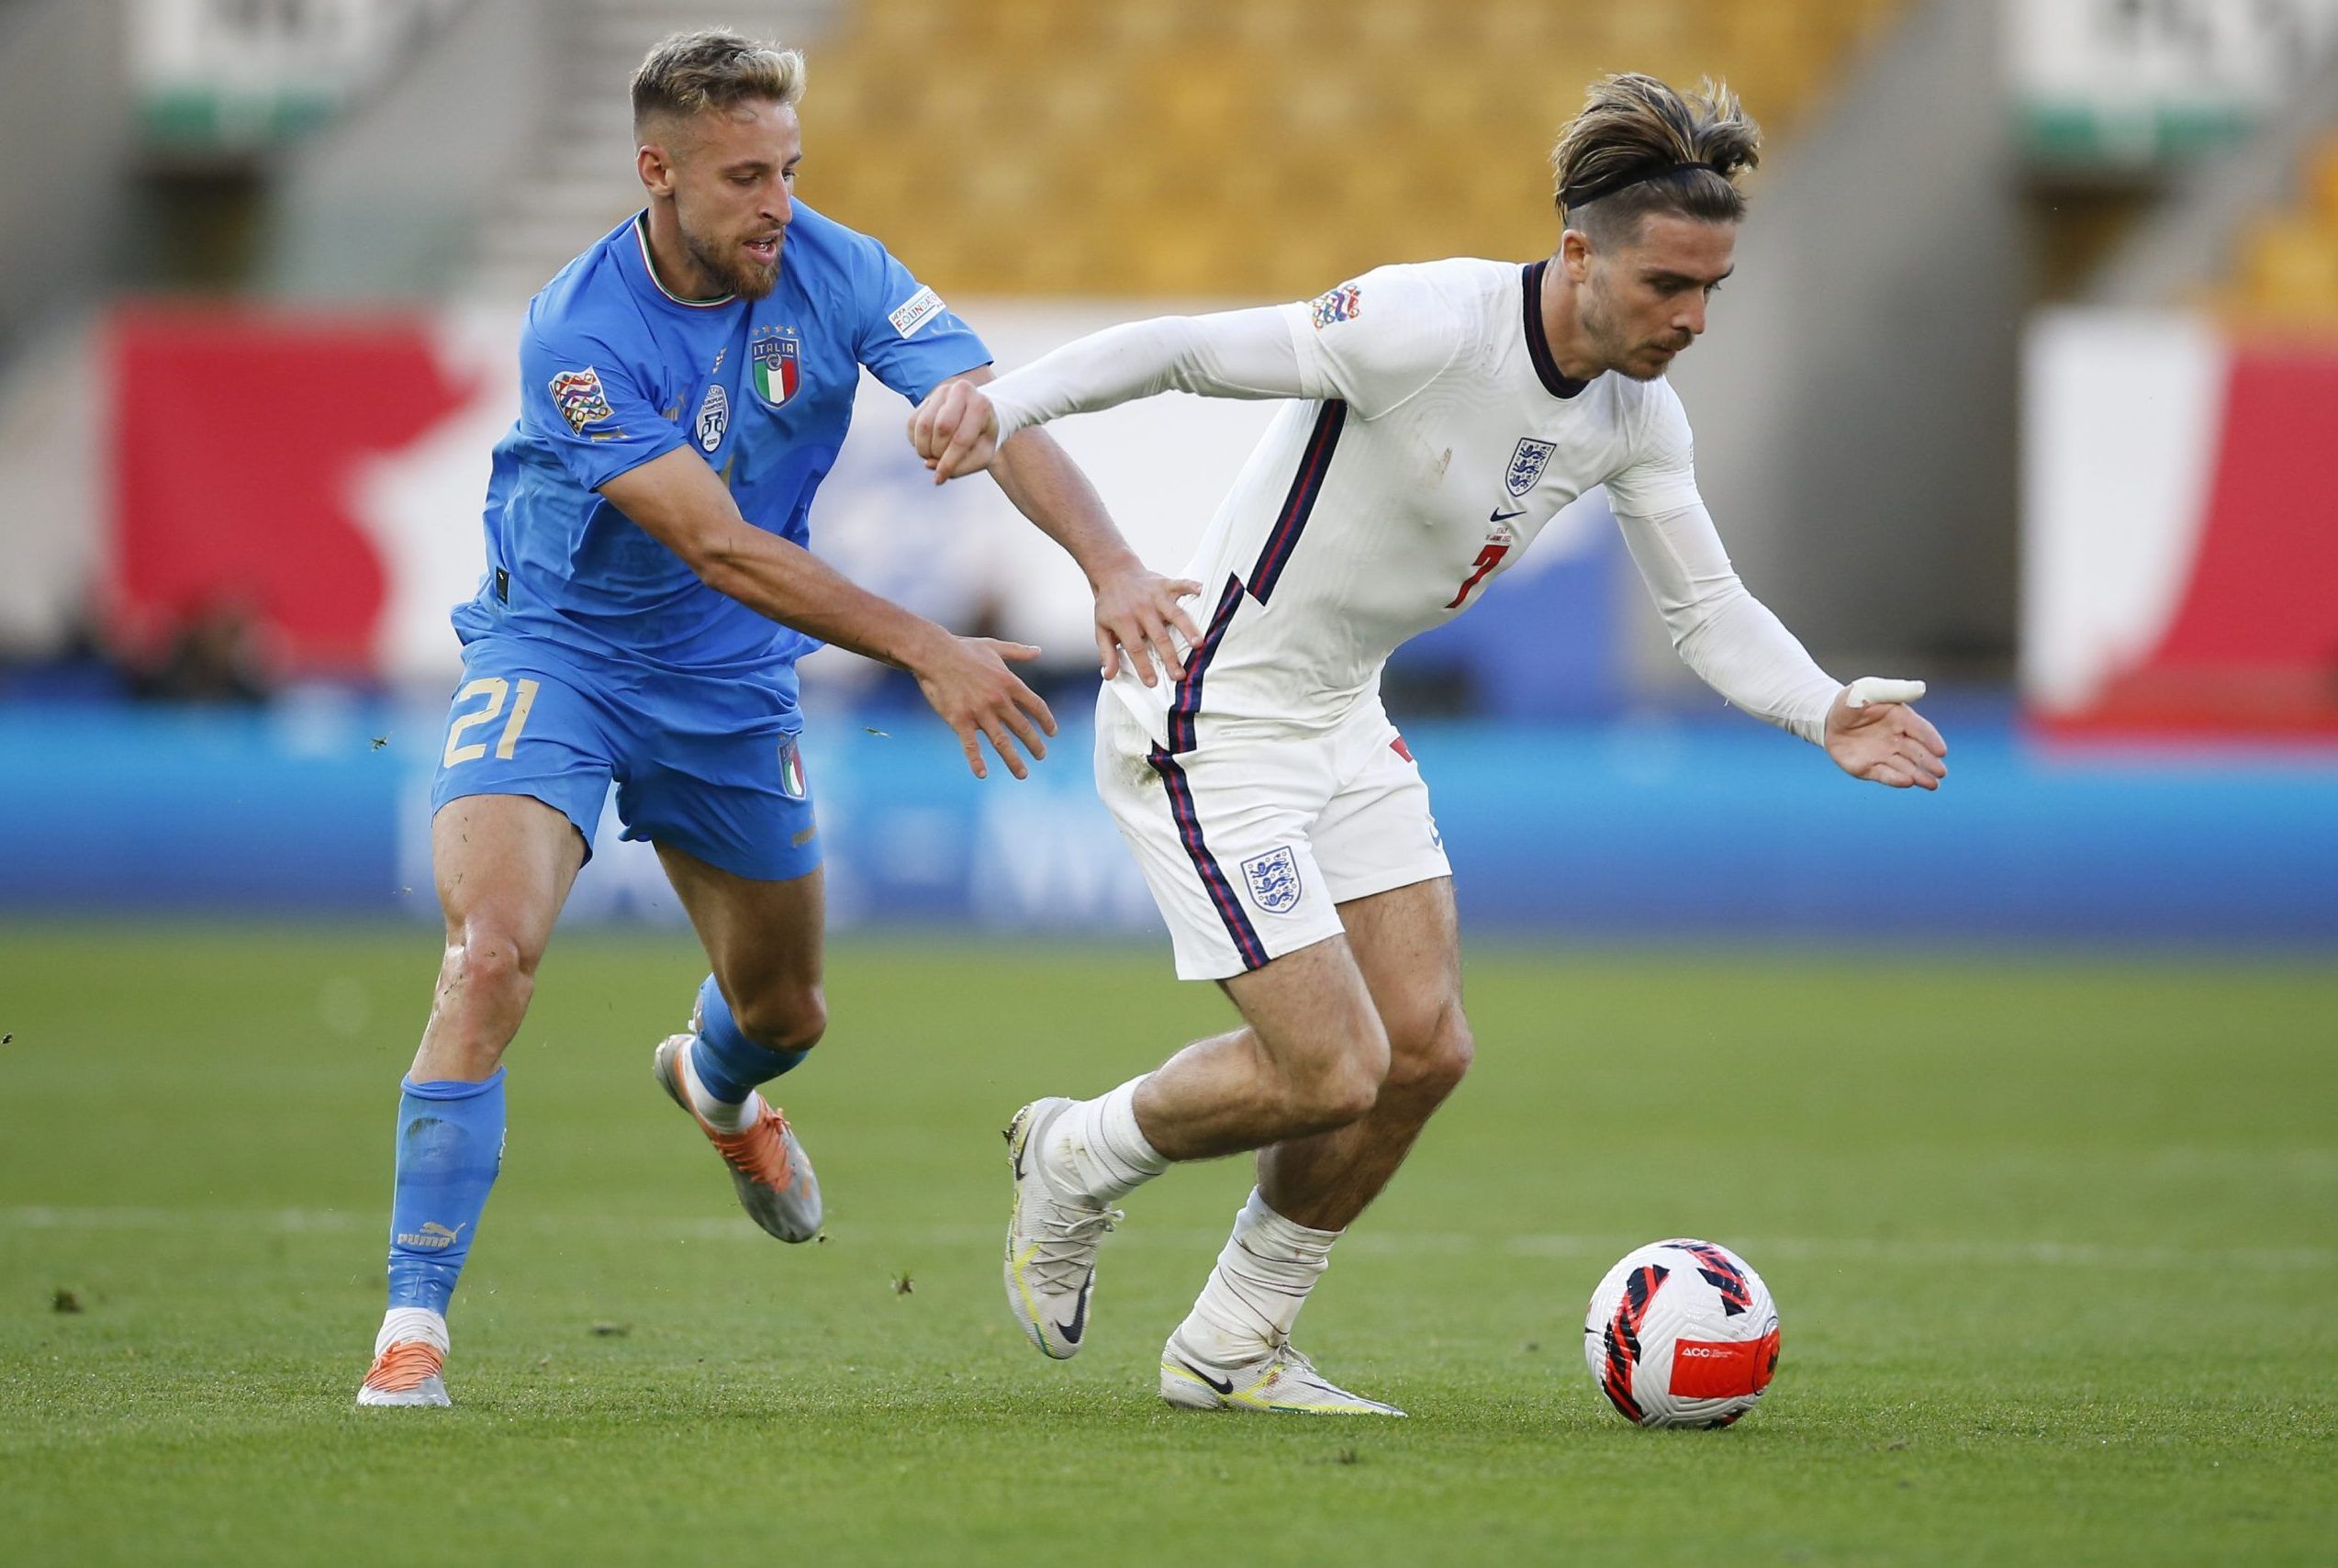 Italy's Davide Frattesi in action with England's Jack Grealish